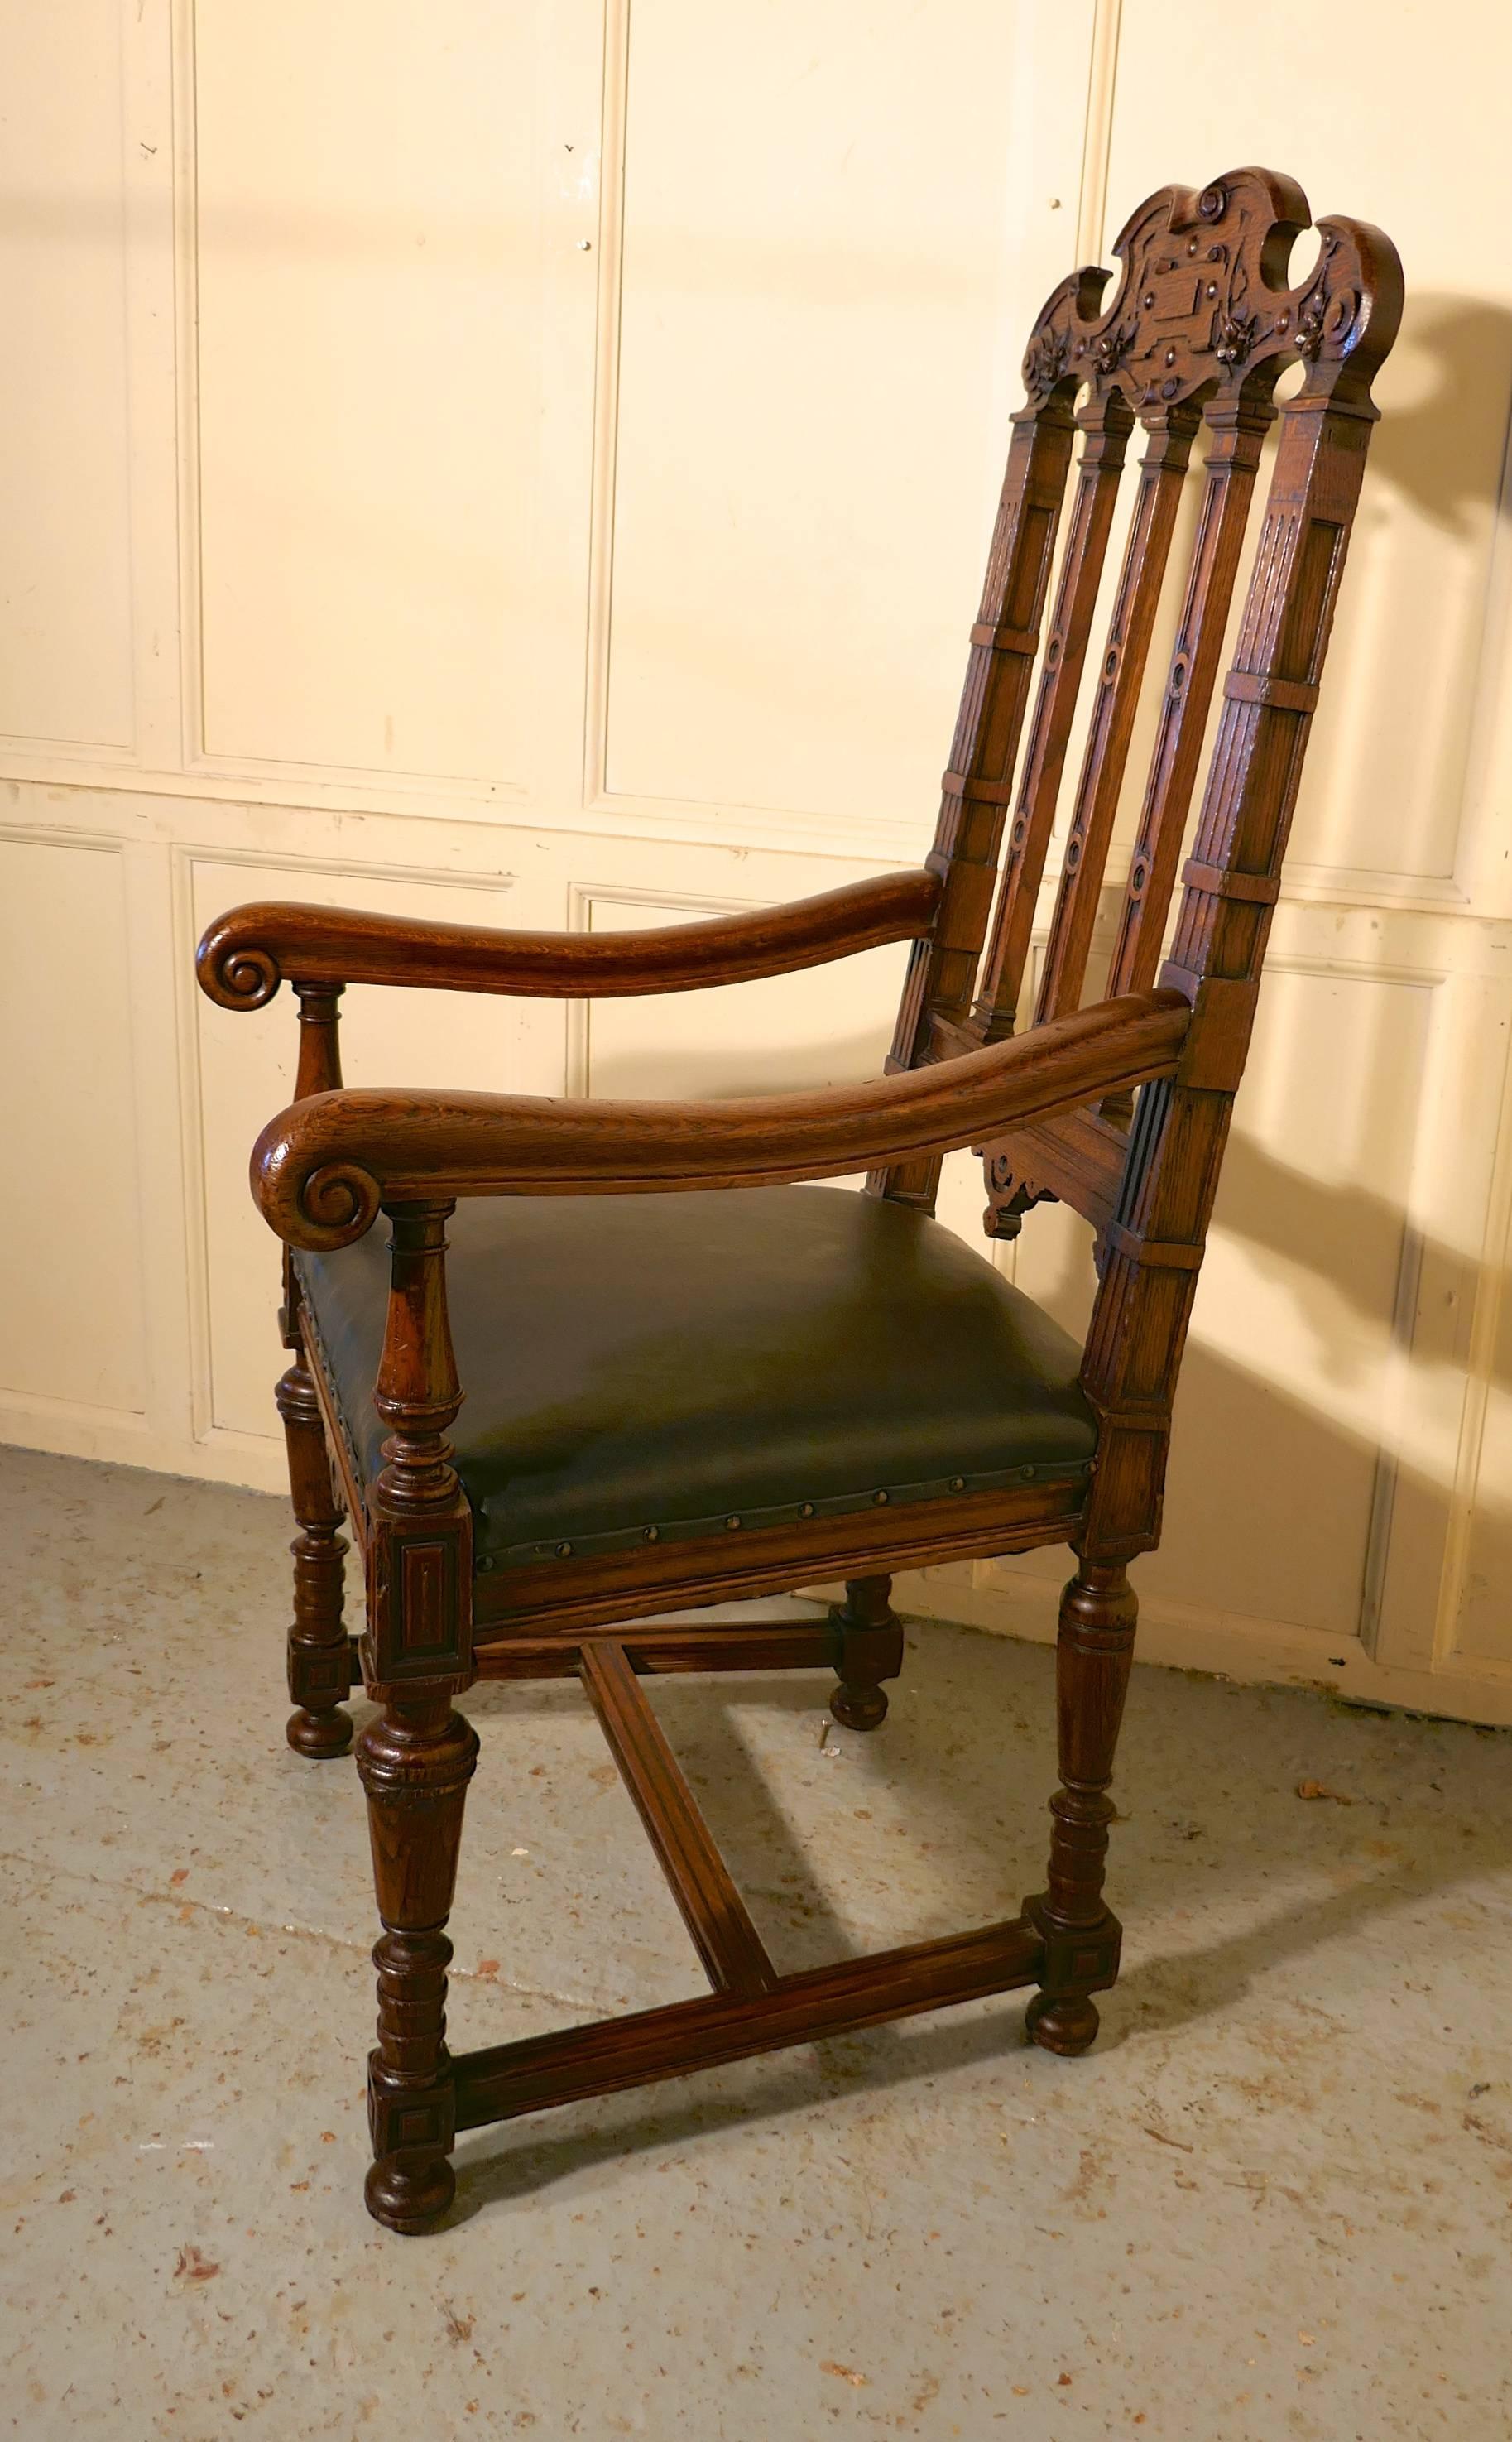 Large Oak Throne or Hall Chair by Gillow 1